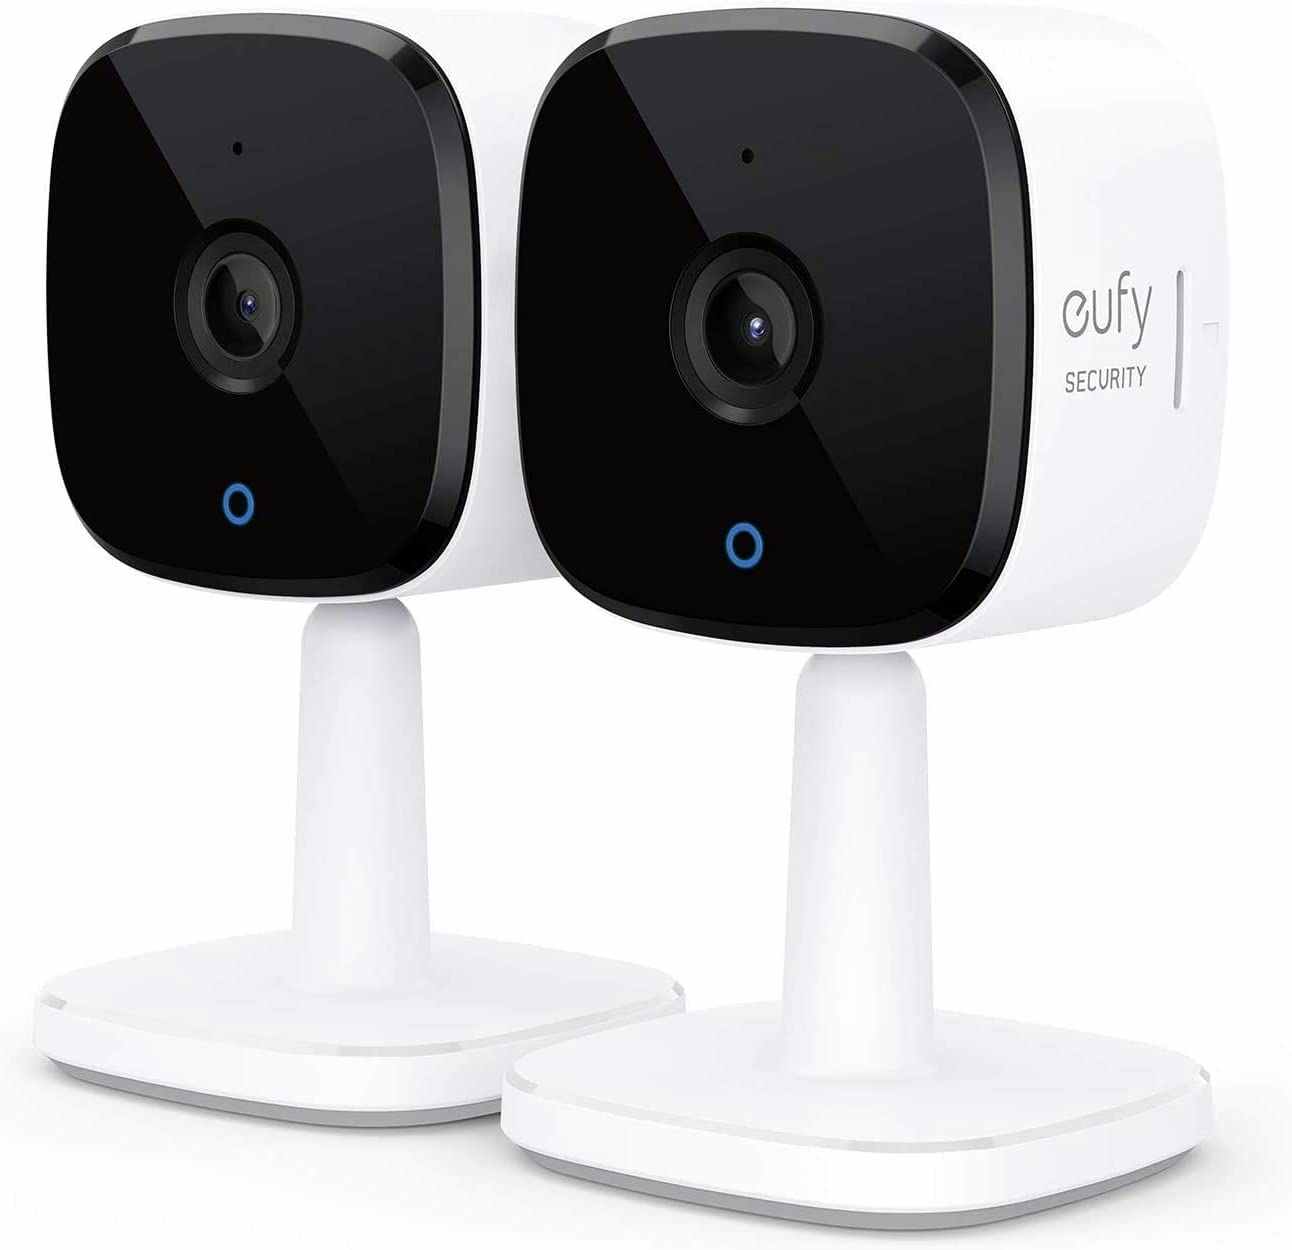 A pack of two Eufy security cameras.